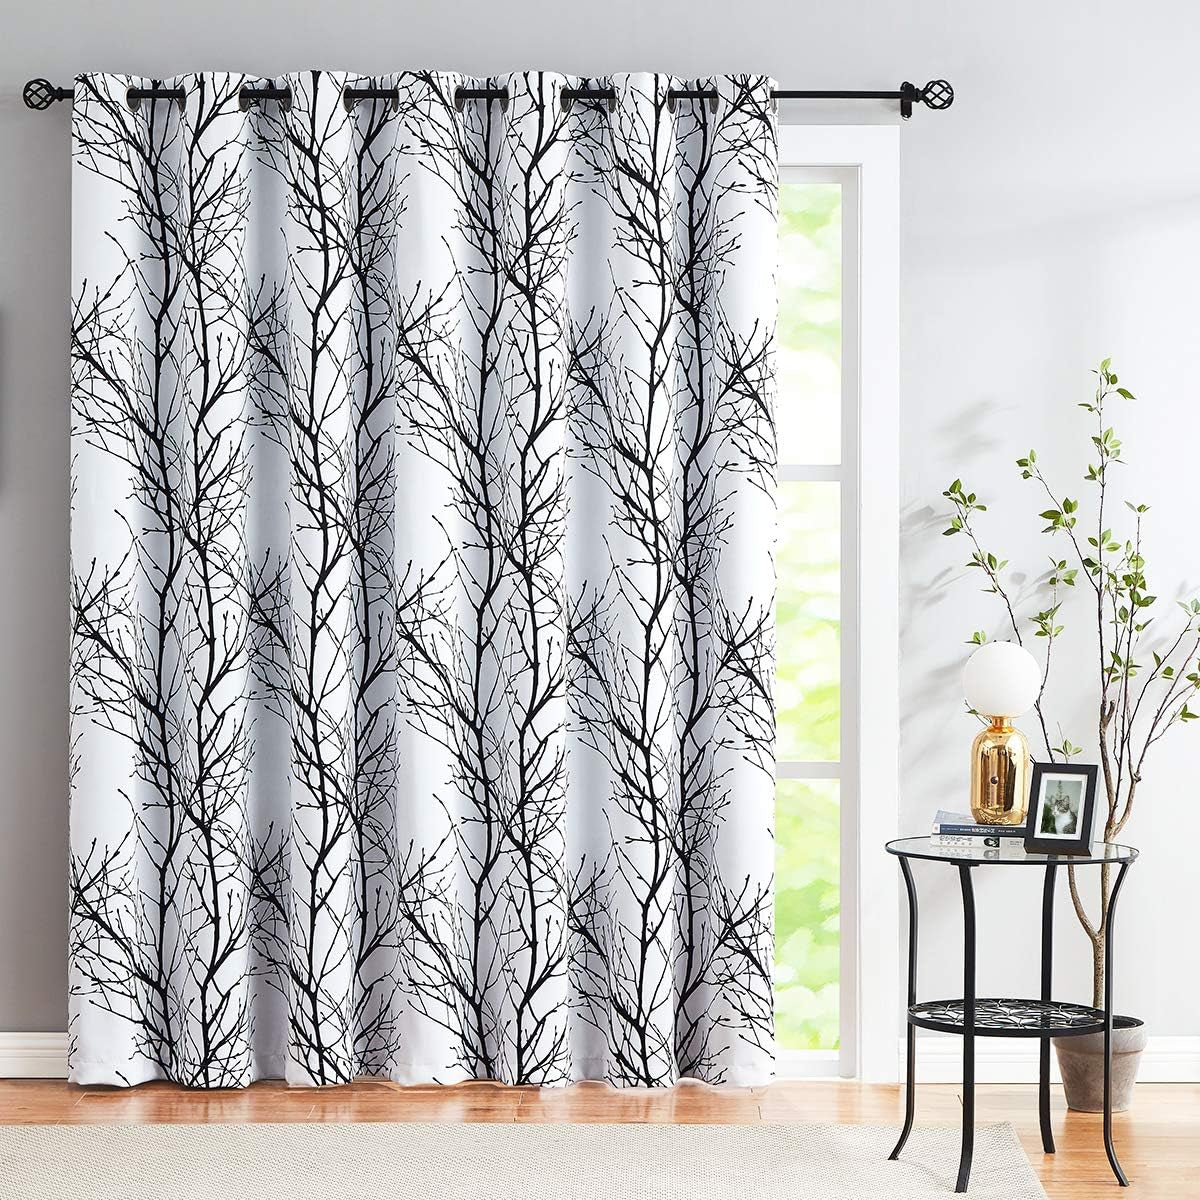 Blue White Blackout Curtains for Bedroom 63" Length Tonal Blue Grey Tree Branch Print Thermal Insulated Full Blackout Curtain Panels for Living Room Triple Weave Window Drapes 50"W 2Panels Grommet Top  Fmfunctex Blackout-Black 100"W X 84"L 1Pc 